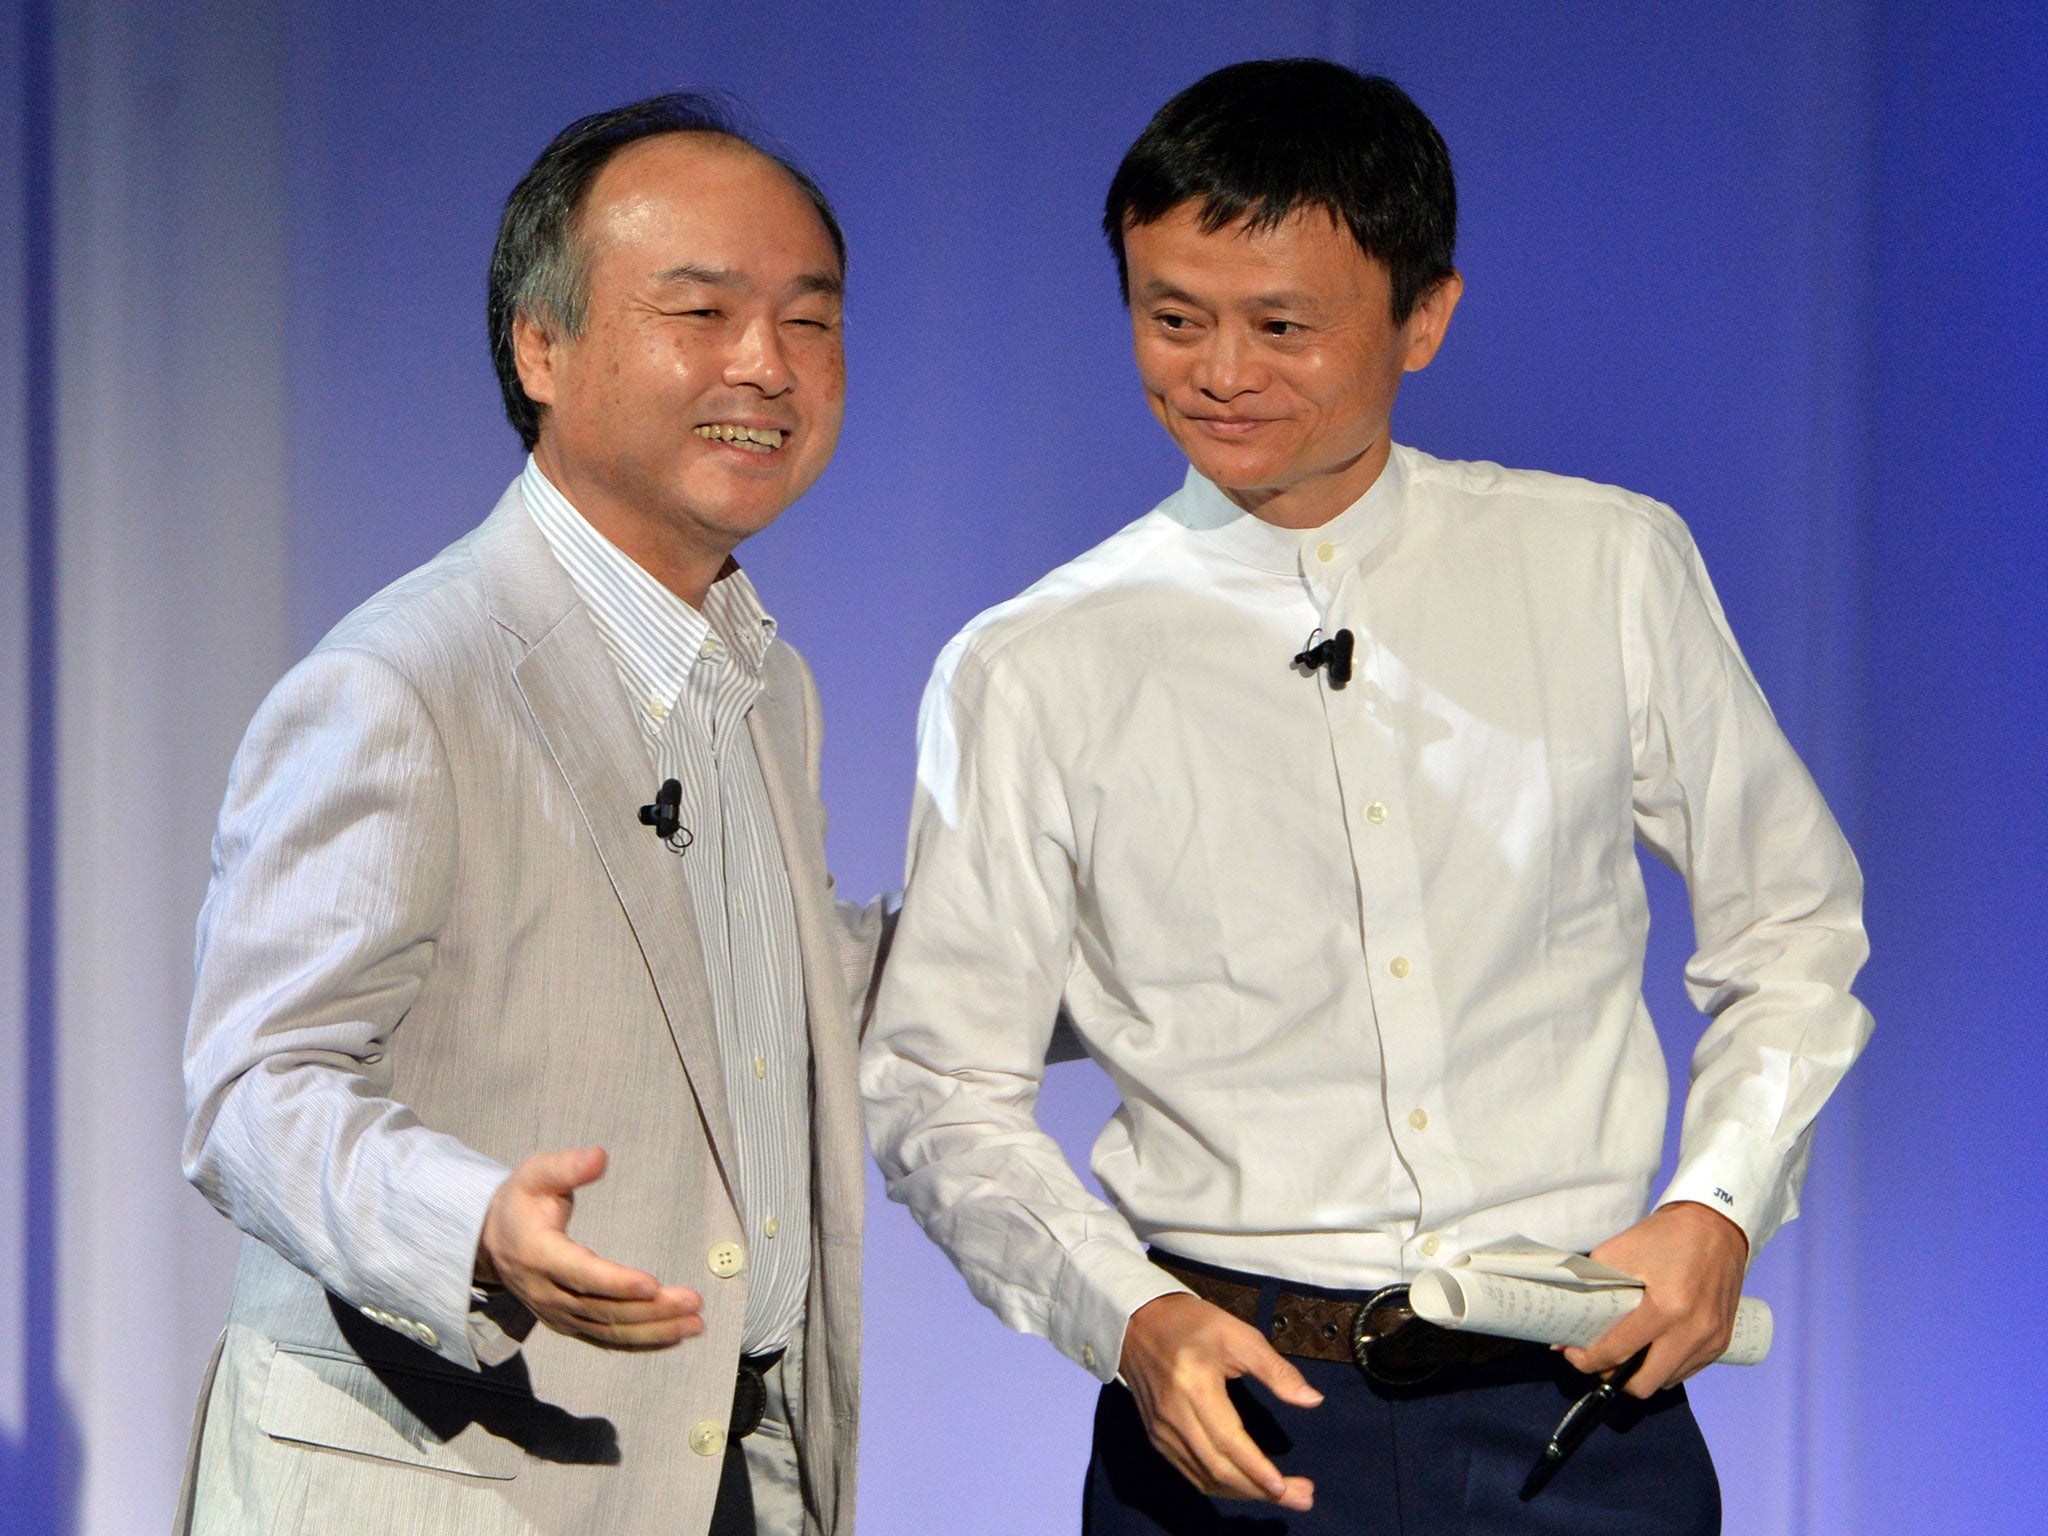 Softbank president Masayoshi Son (L) introduces Alibaba Group chairman Jack Ma during the Softbank World 2014 annual forum in Tokyo on July 15, 2014